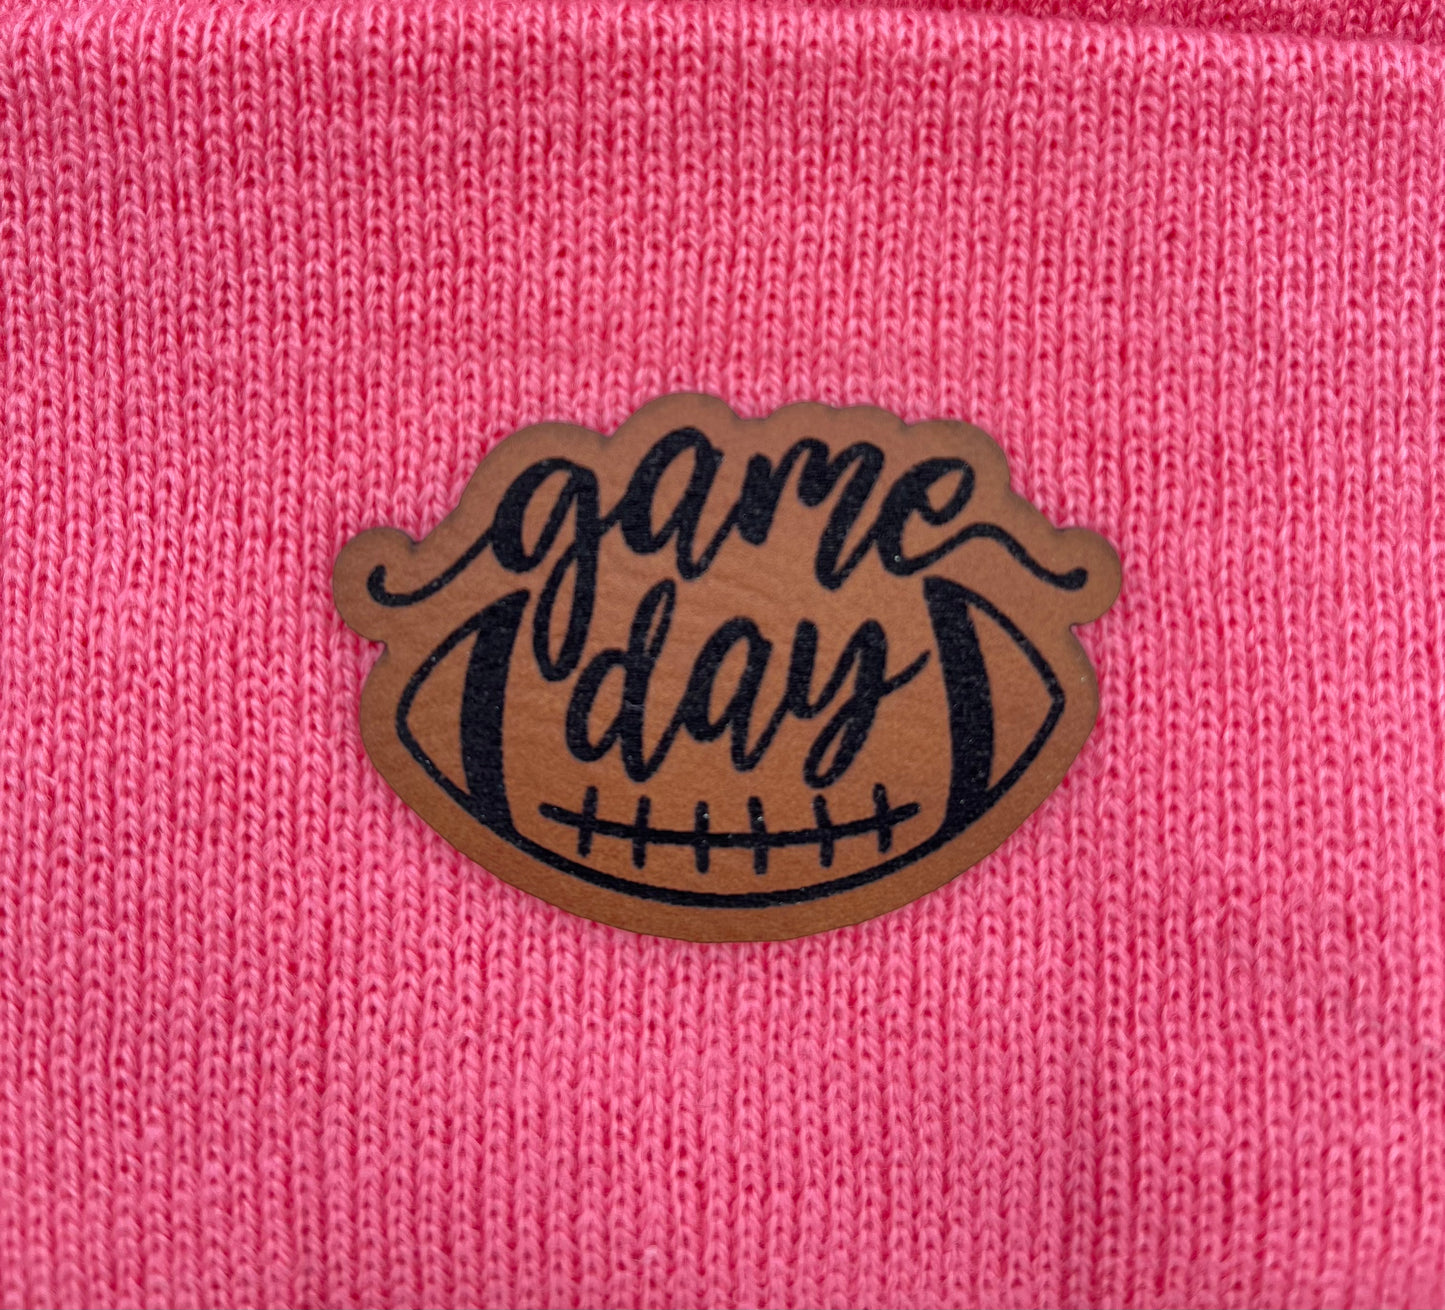 Game day leather patch hat